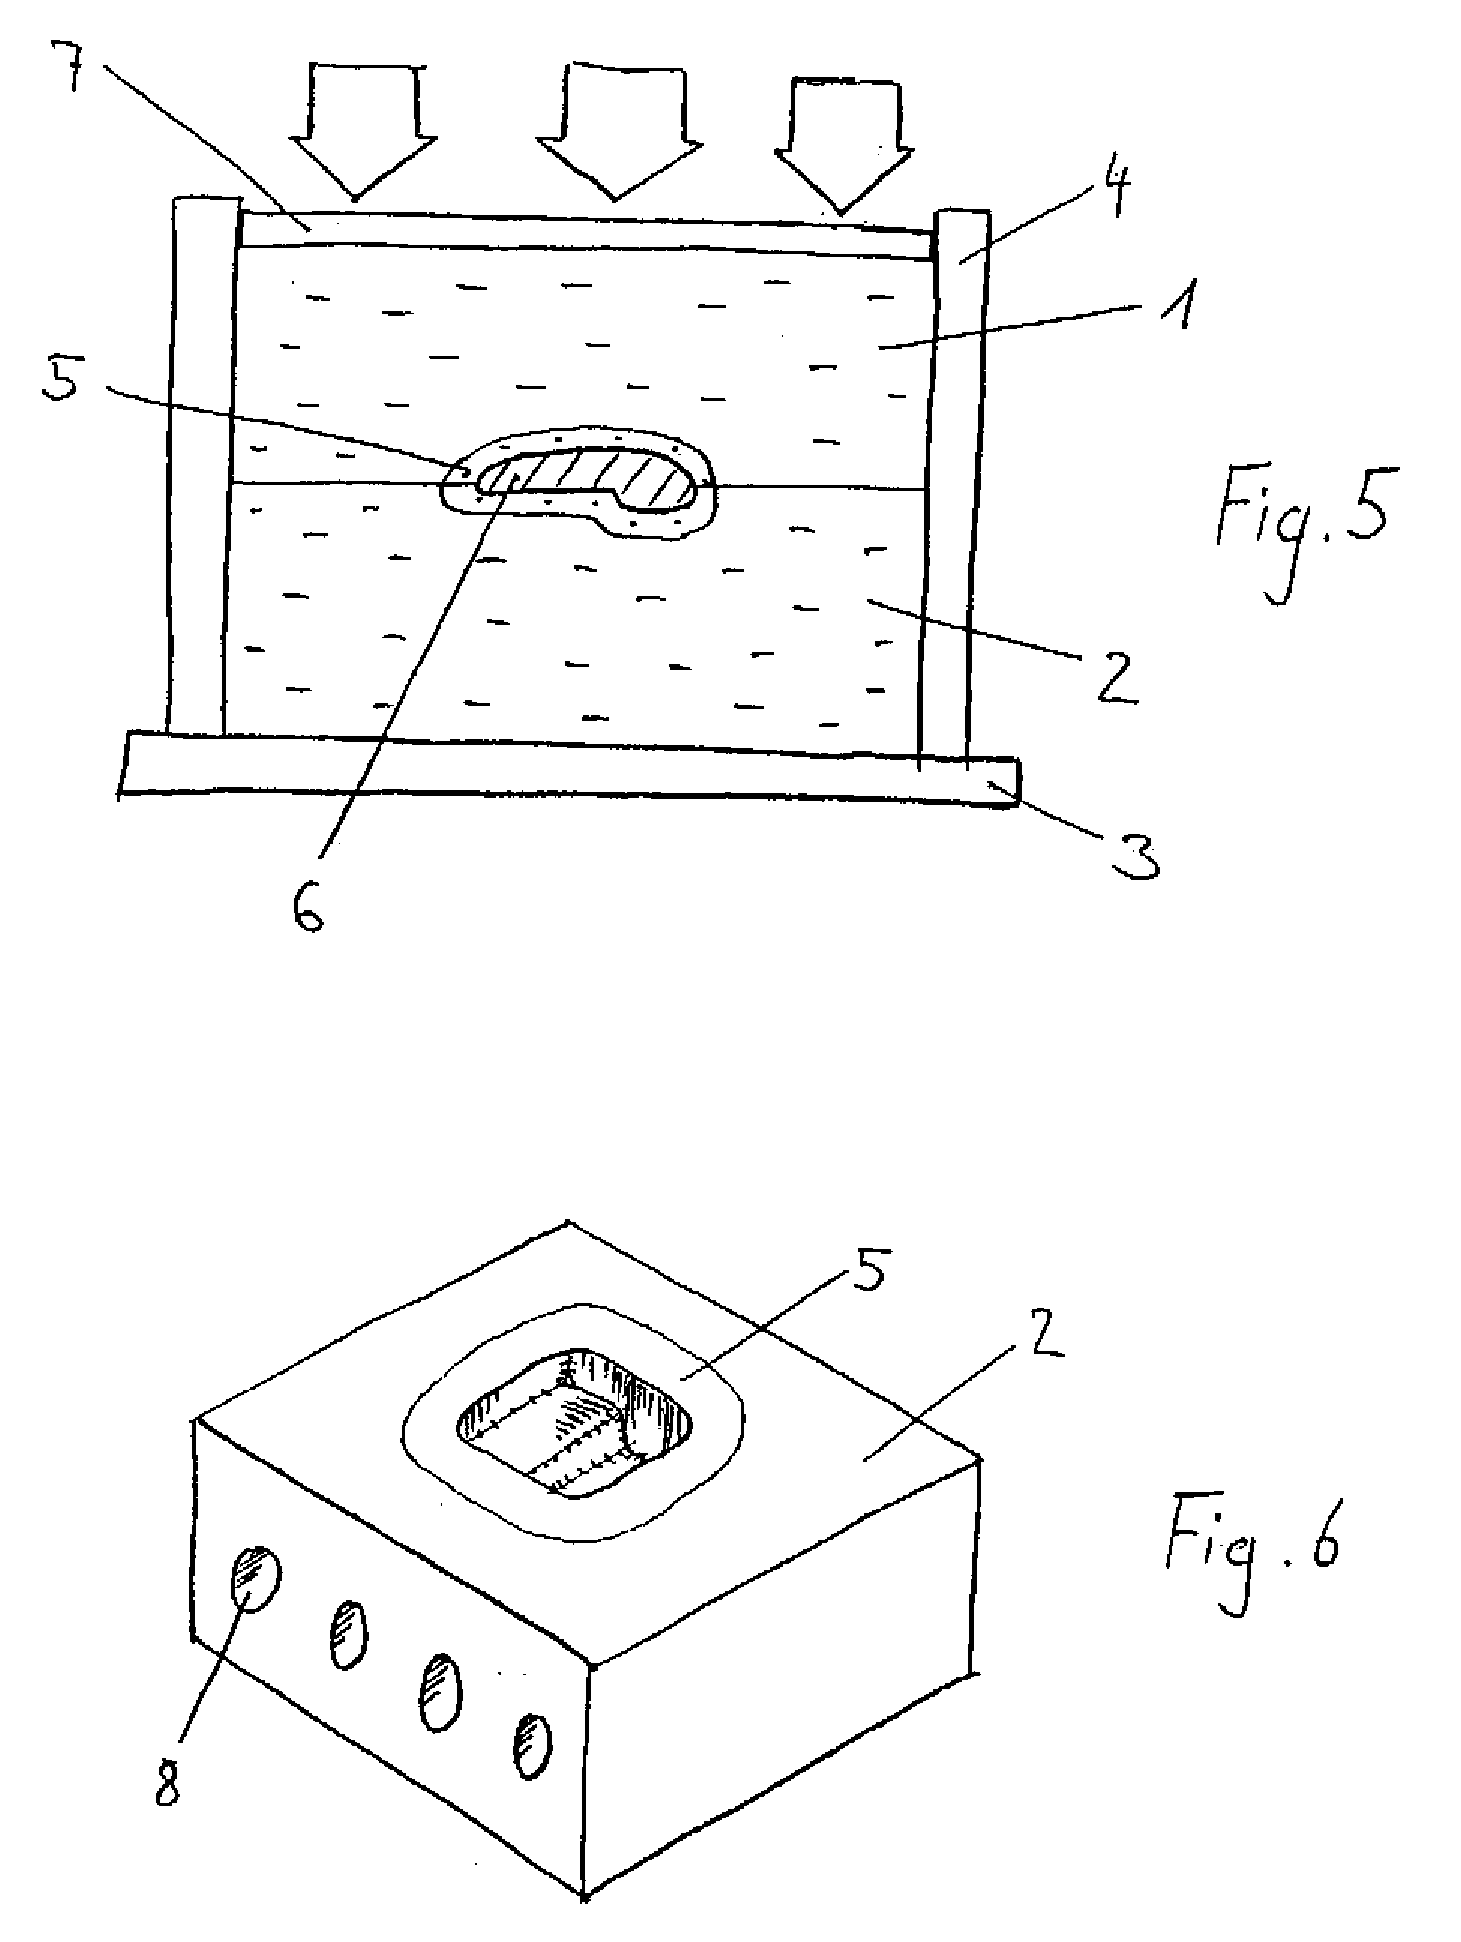 Mold for producing an article